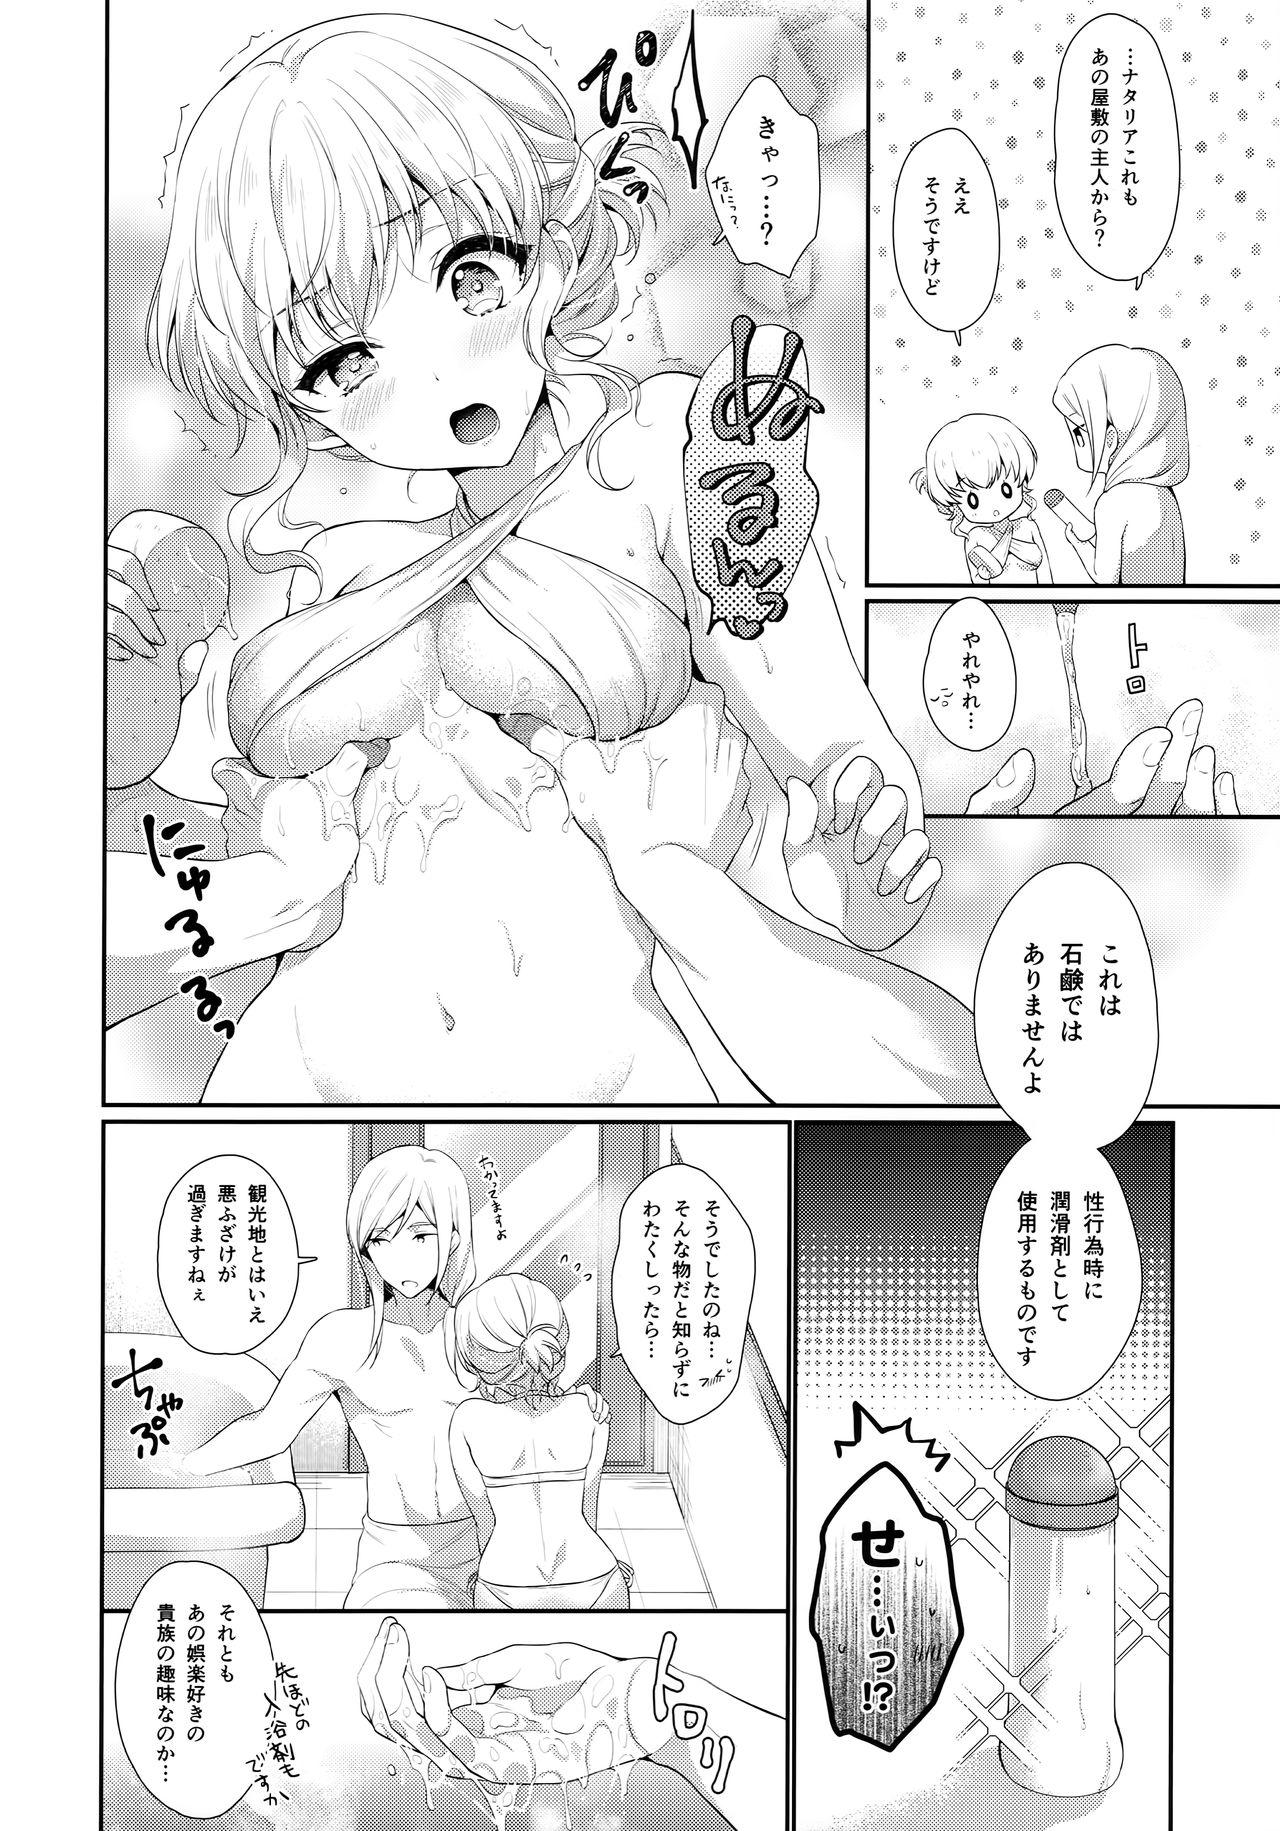 Facebook Bath Time Healer - Tales of the abyss Shower - Page 7